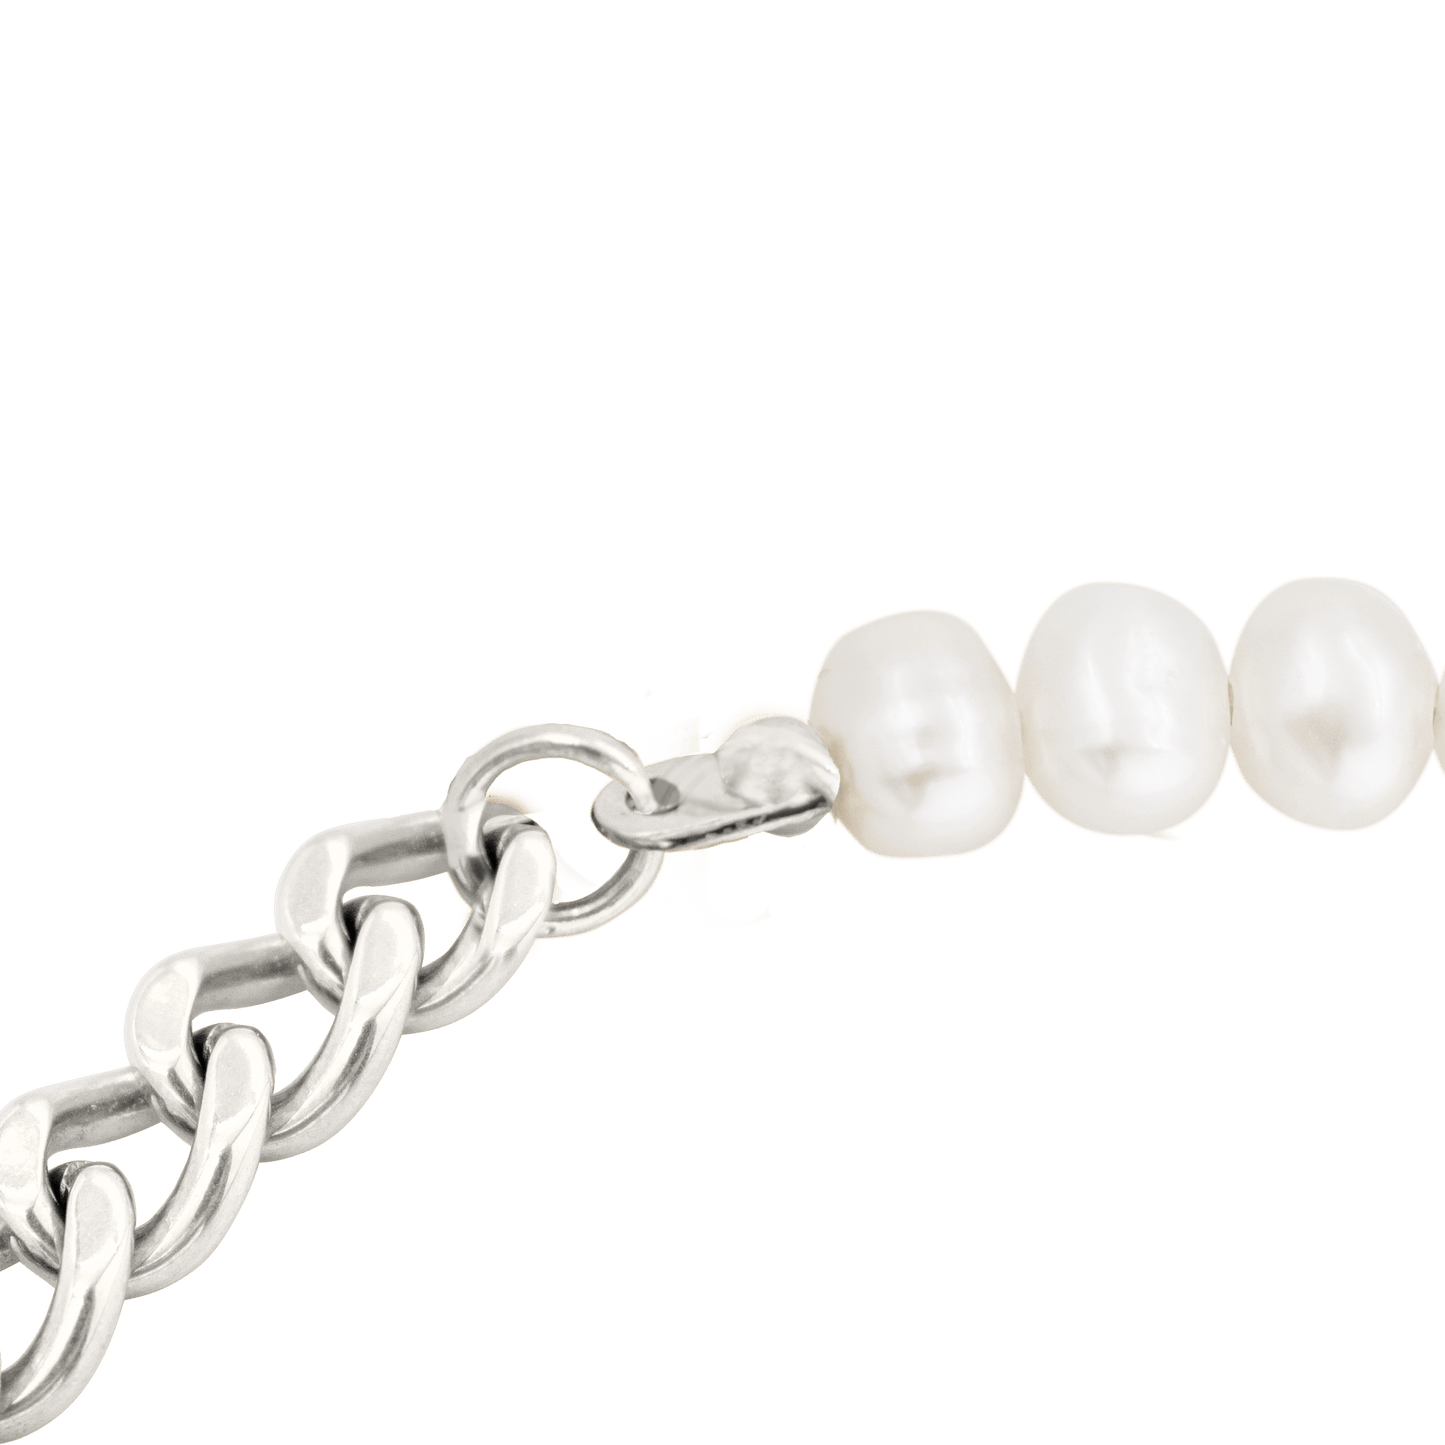 Chain'n'Pearls Collana Argento